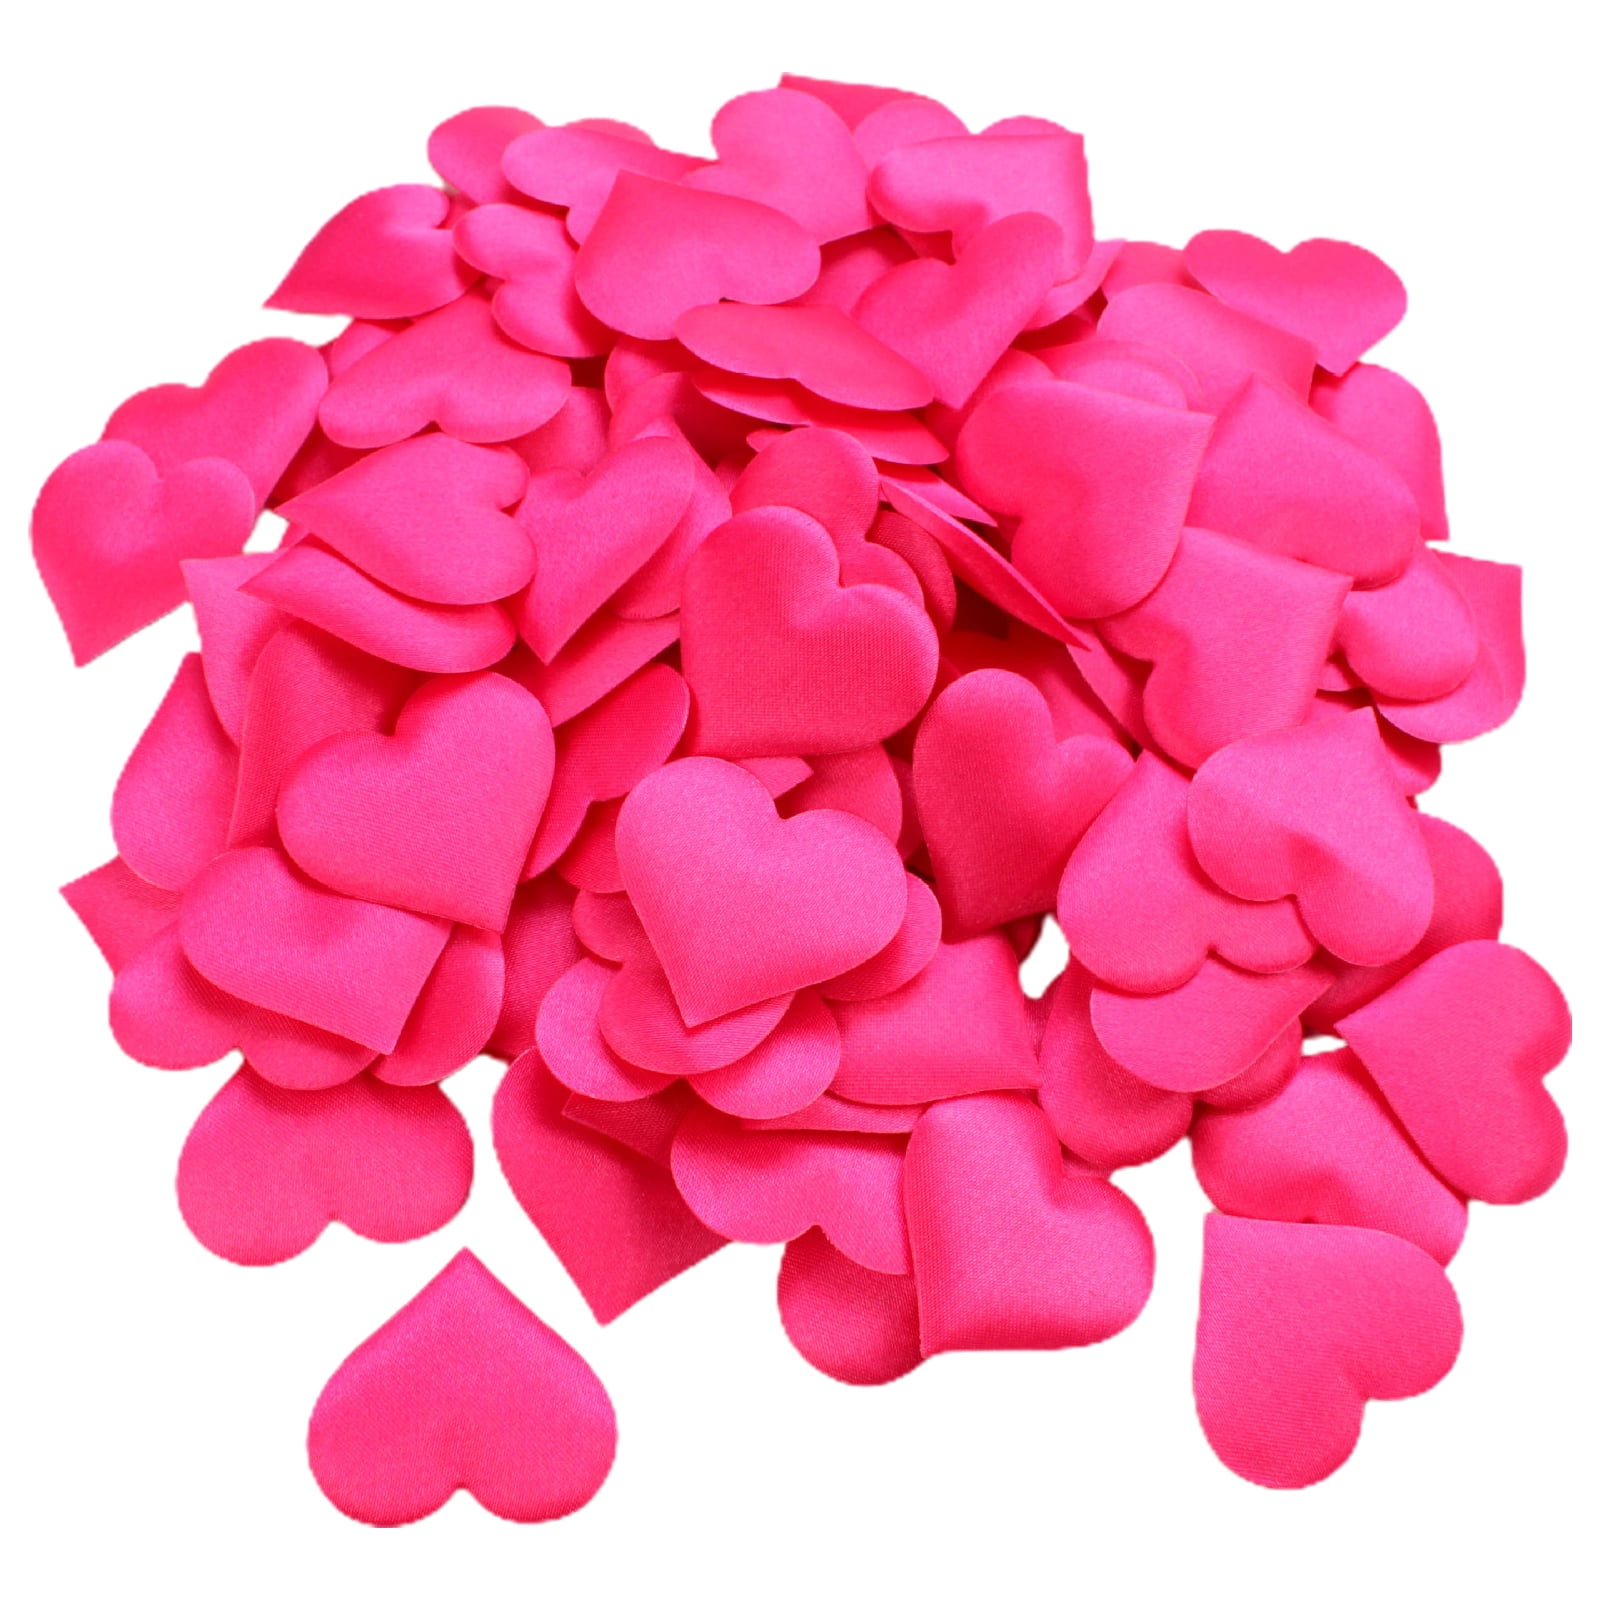 200 White Rose Petals Weddings Party's Decorations Confetti Anniversary Favors 